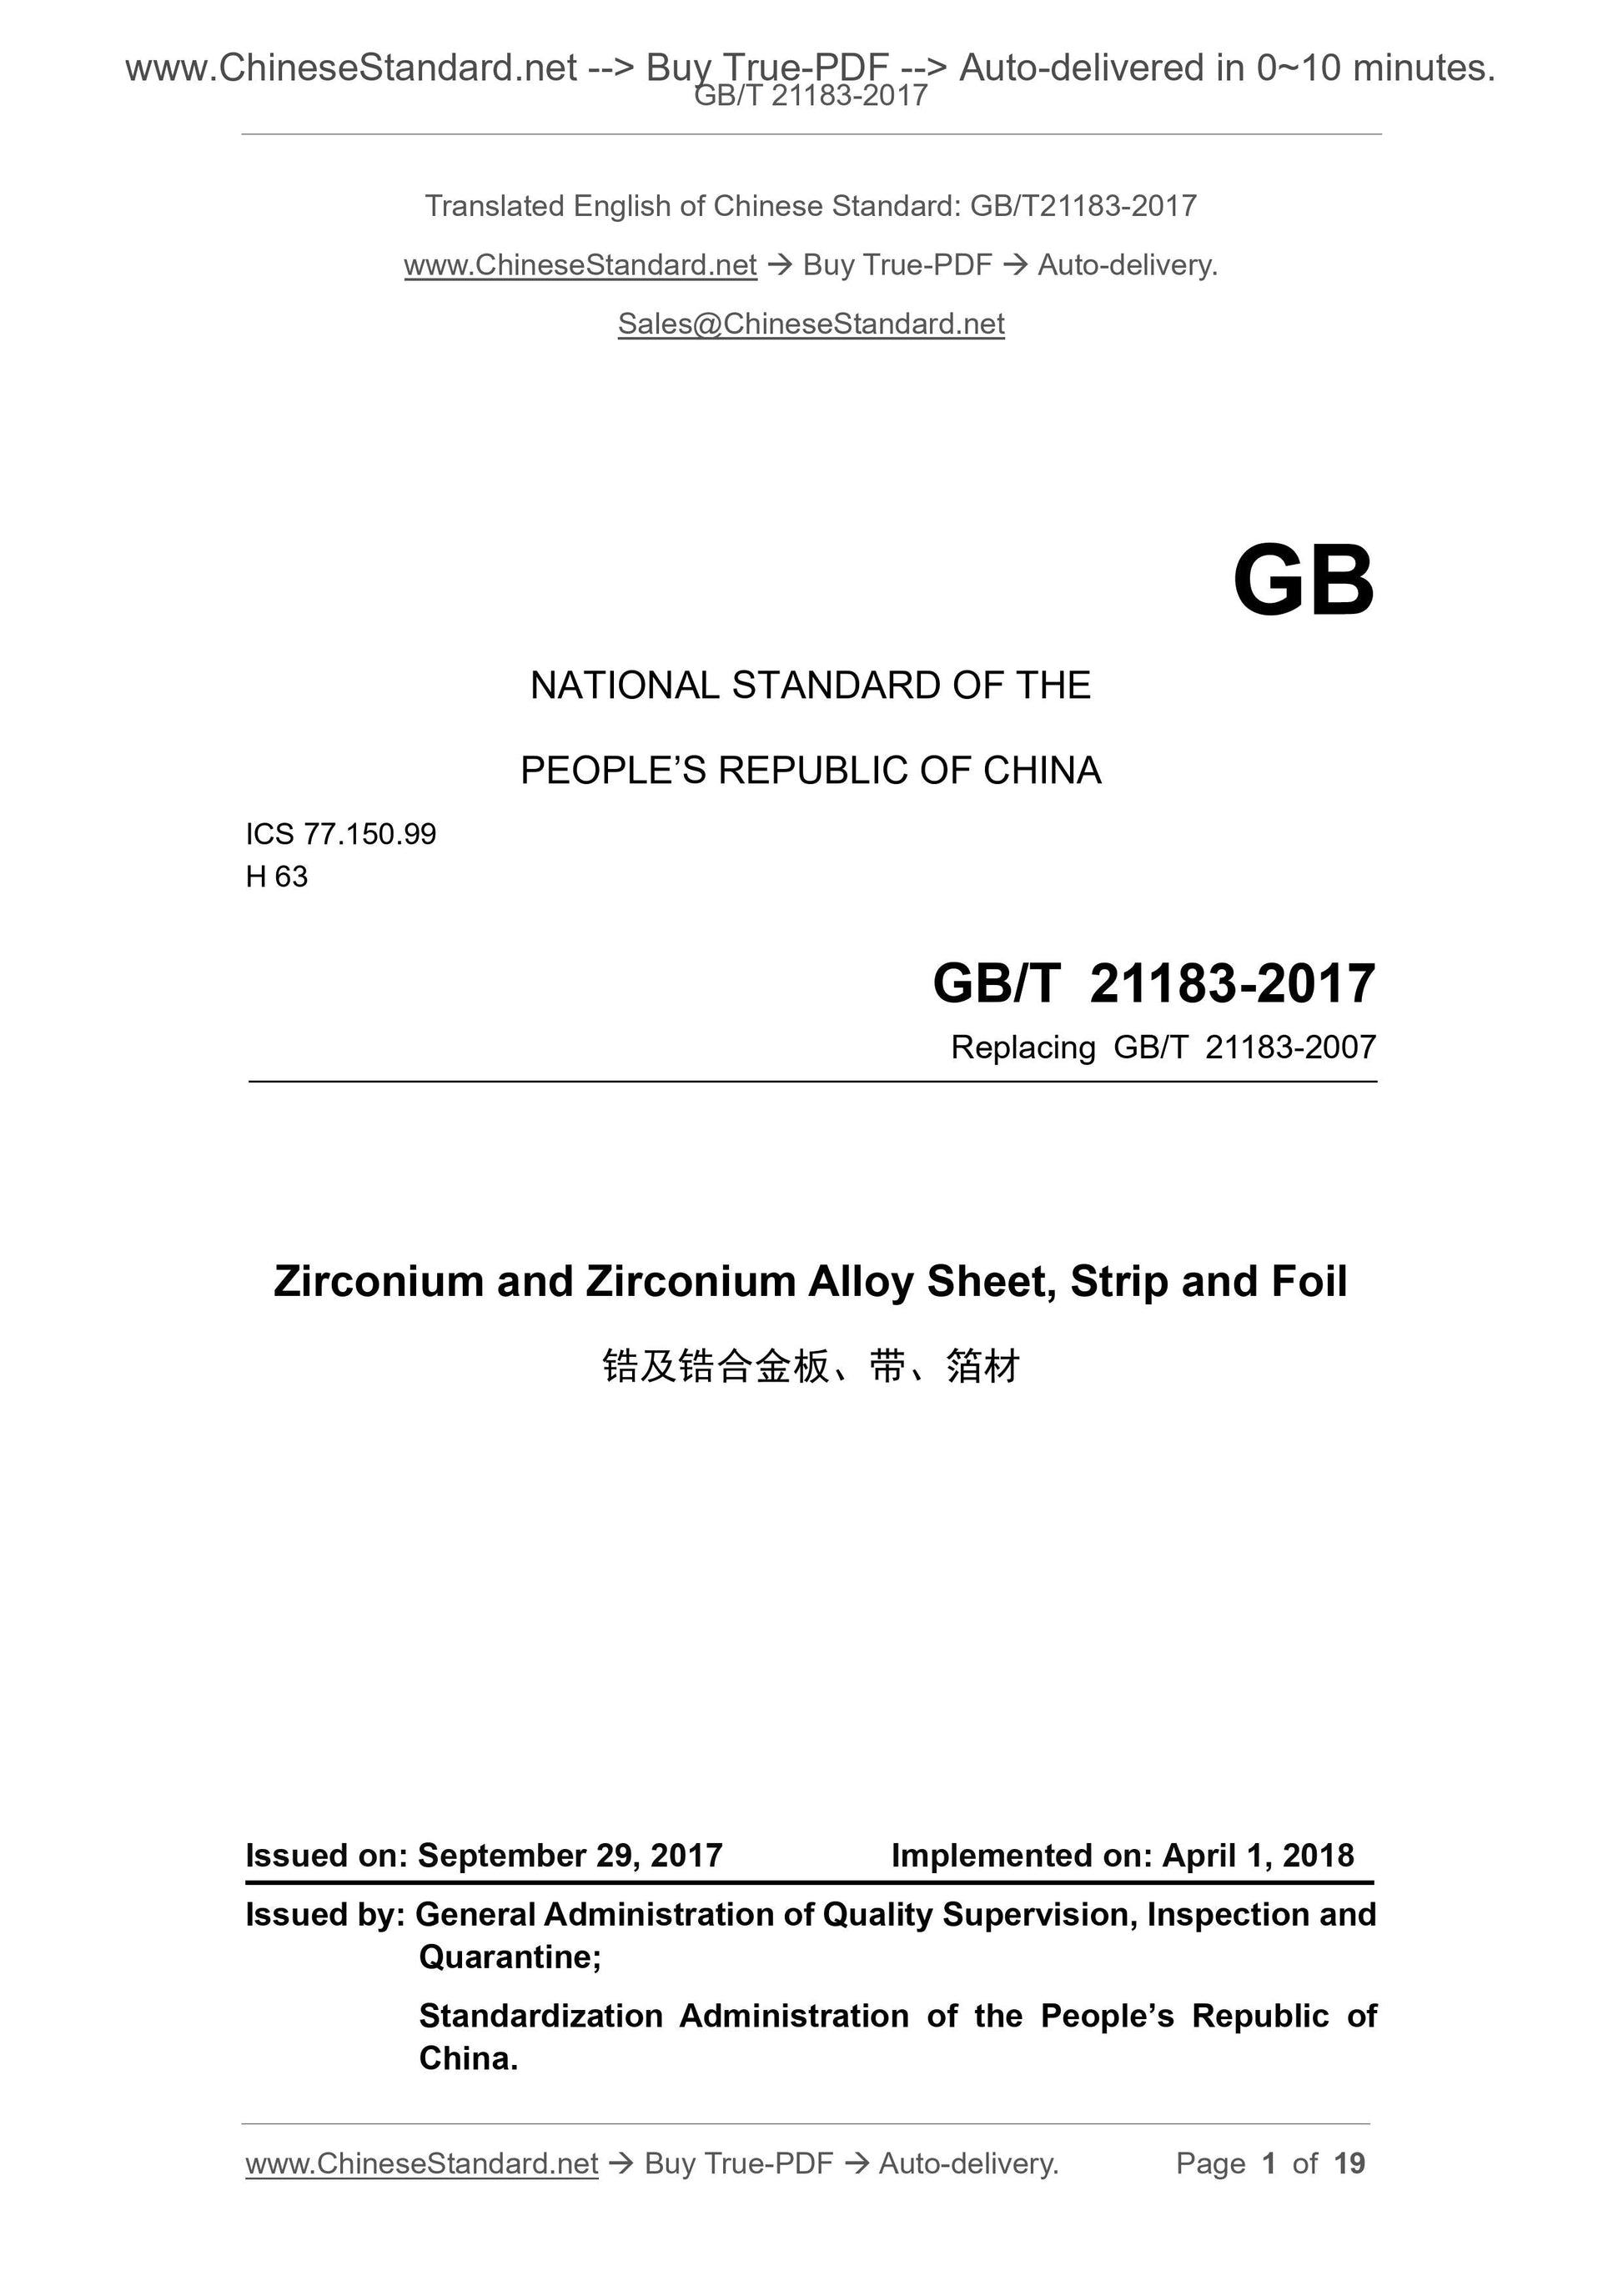 GB/T 21183-2017 Page 1